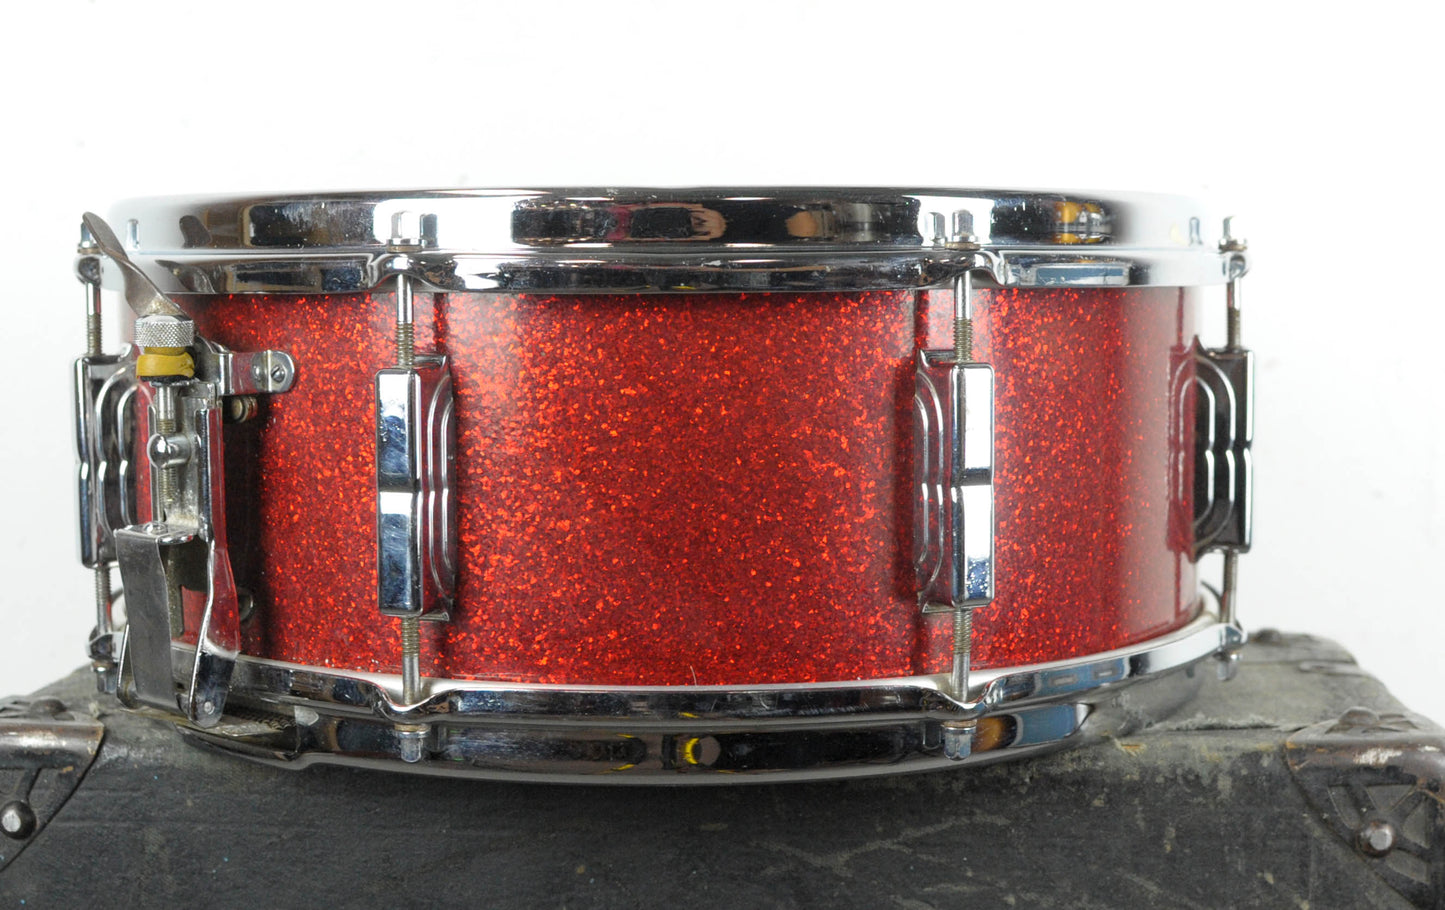 1965 Leedy 5x14 Shelly Manne Sparkling Red Pearl Snare Drum